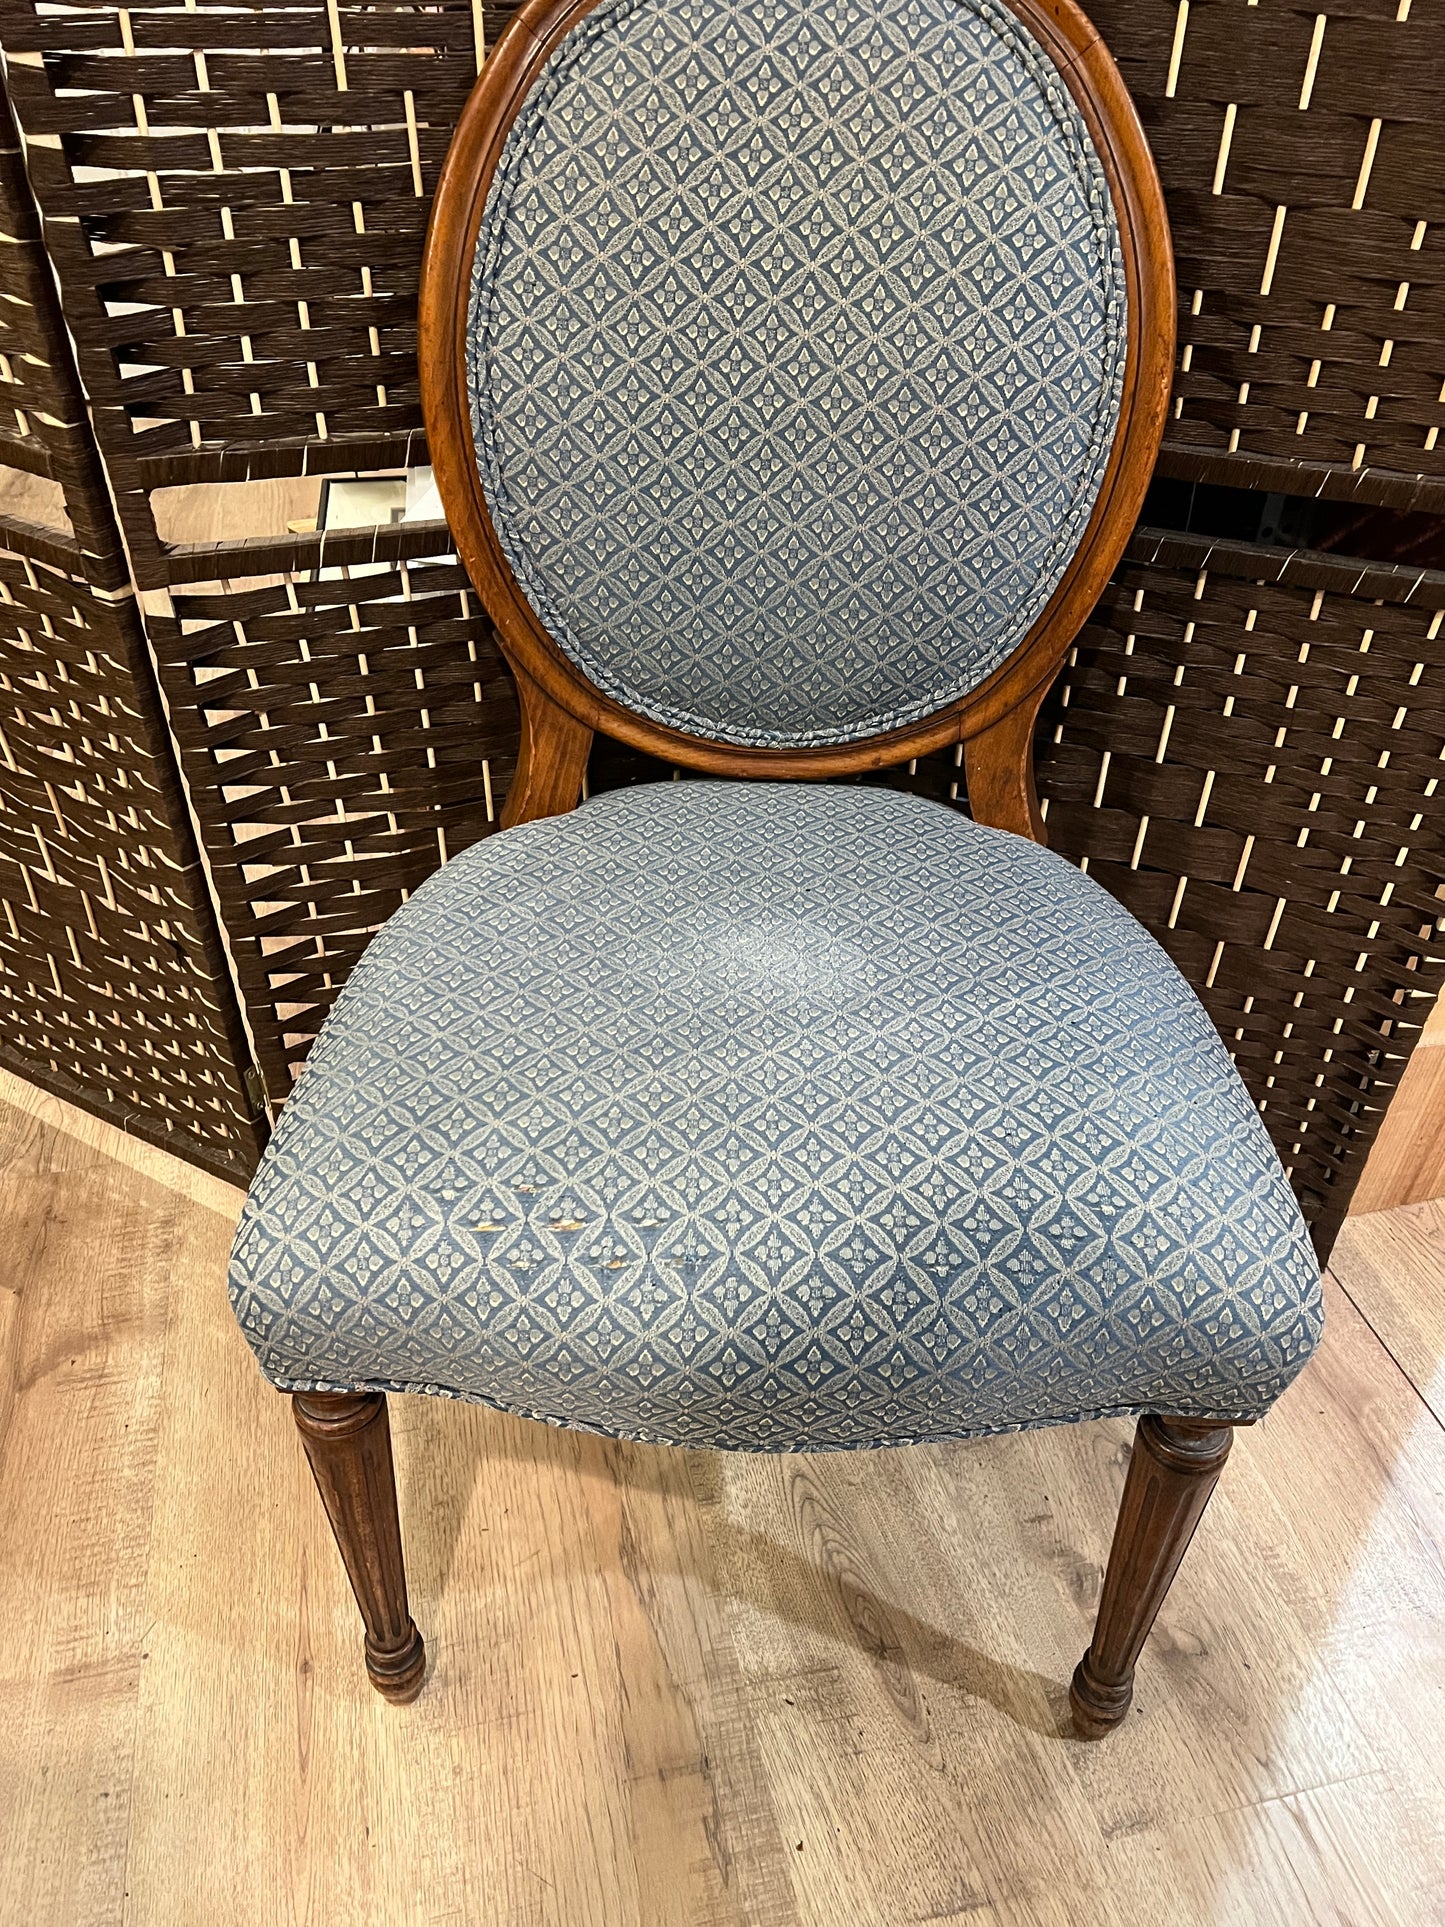 Blue French Oval Upholstered Chair